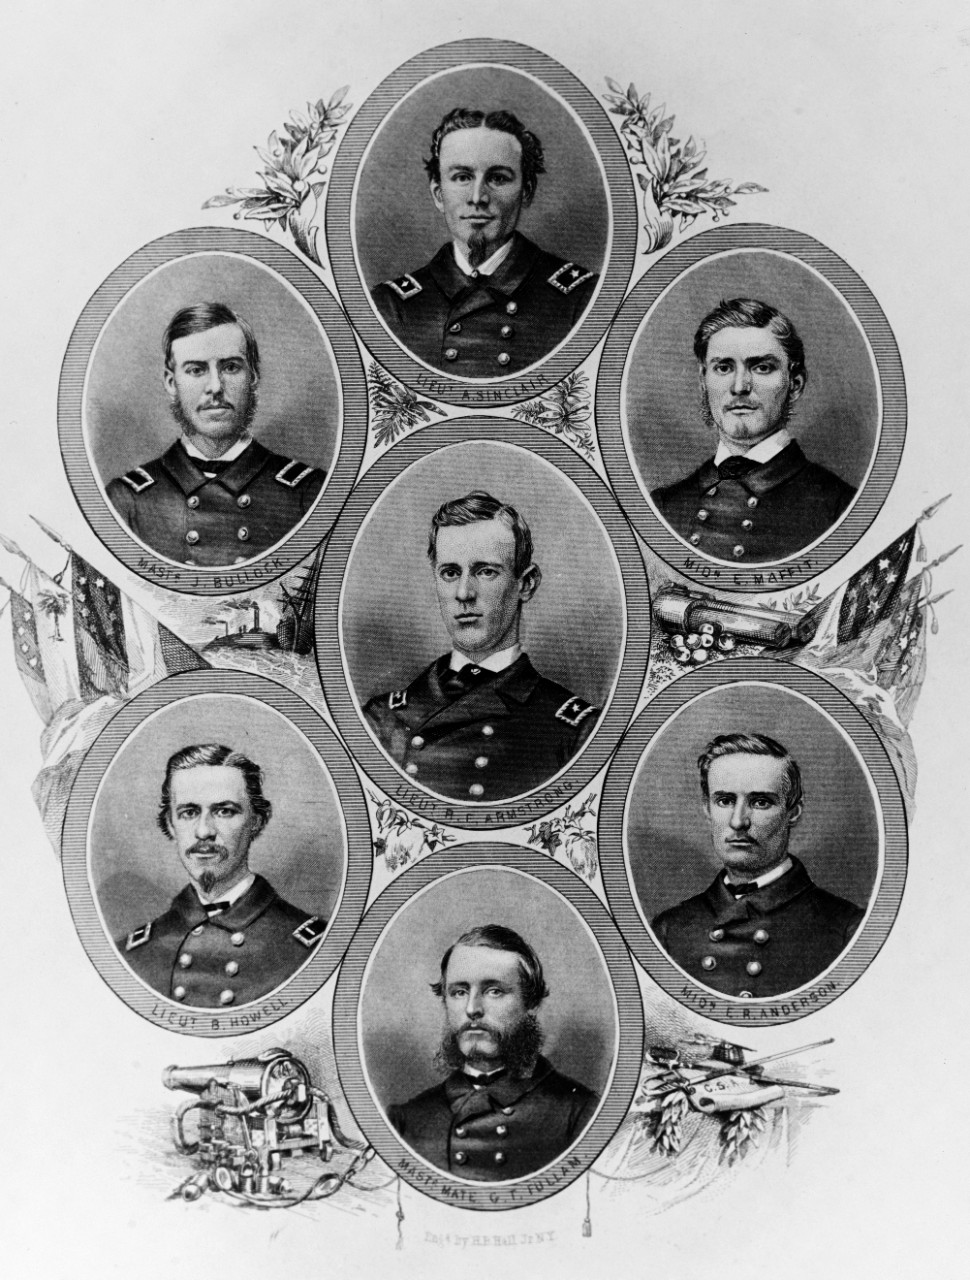 Photo #: NH 66640  Confederate States Navy Officers